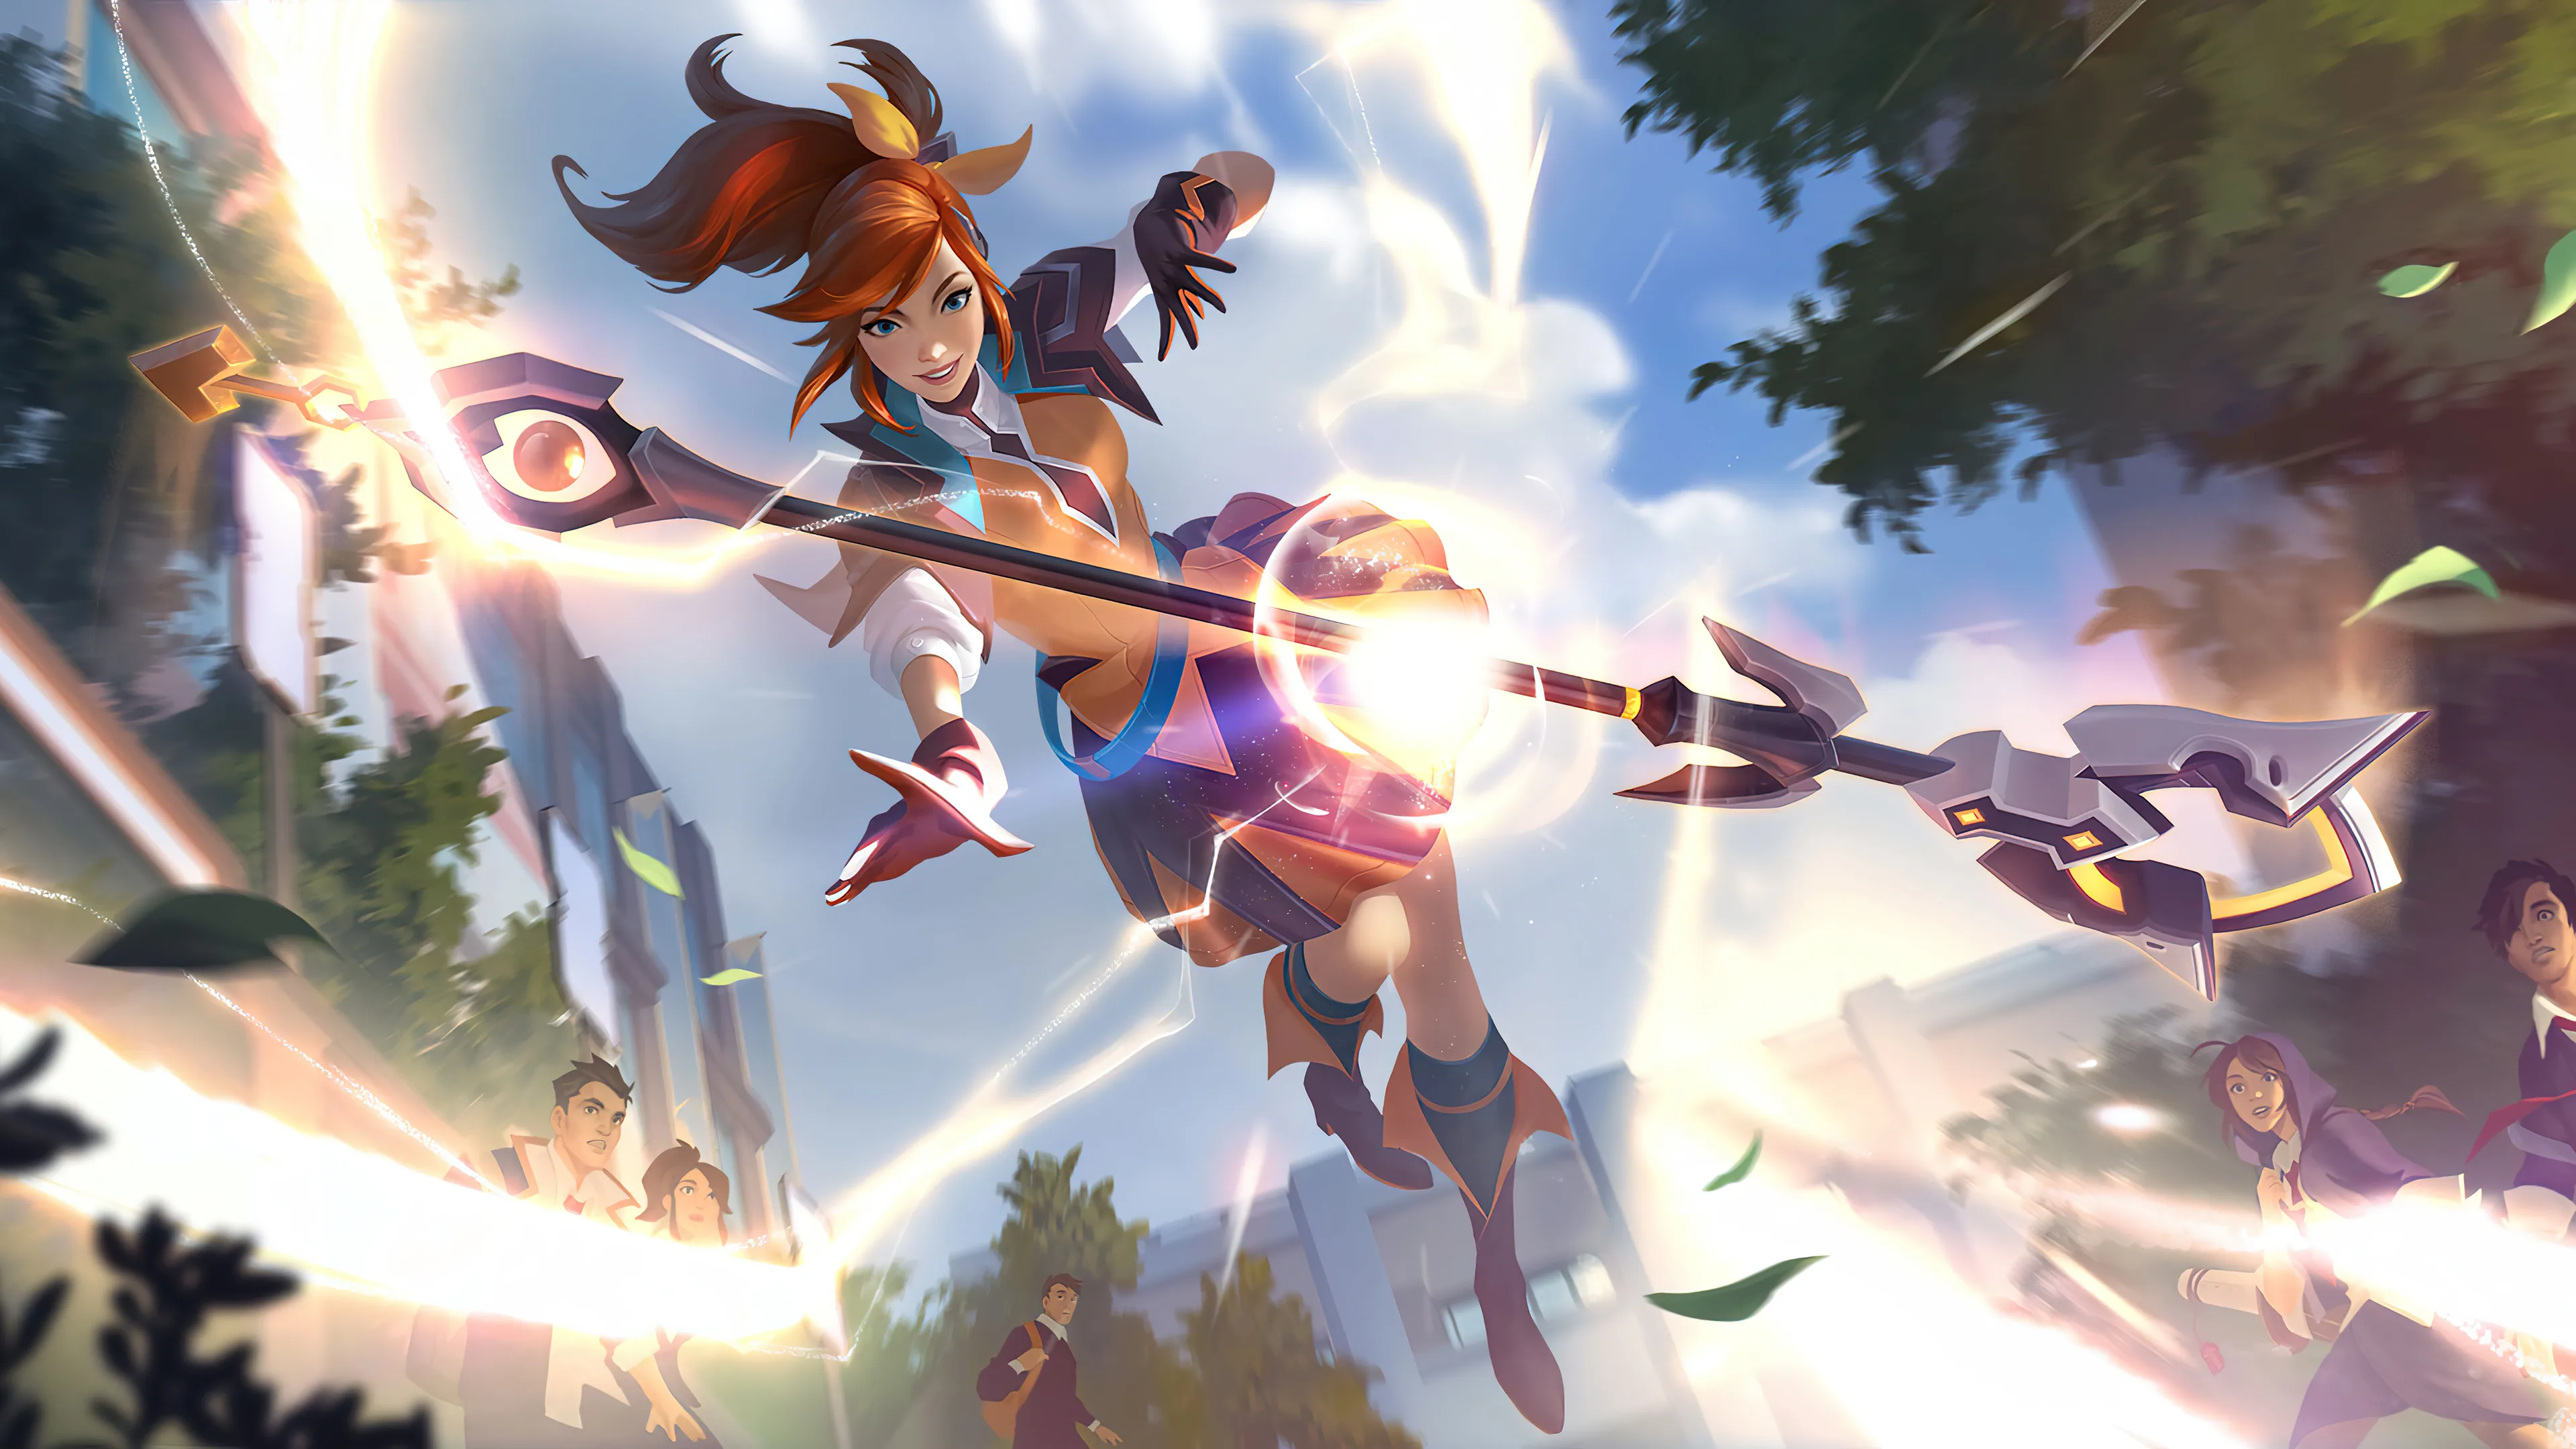 Wallpaper girl staff knight Lux League Of Legends images for desktop  section игры  download